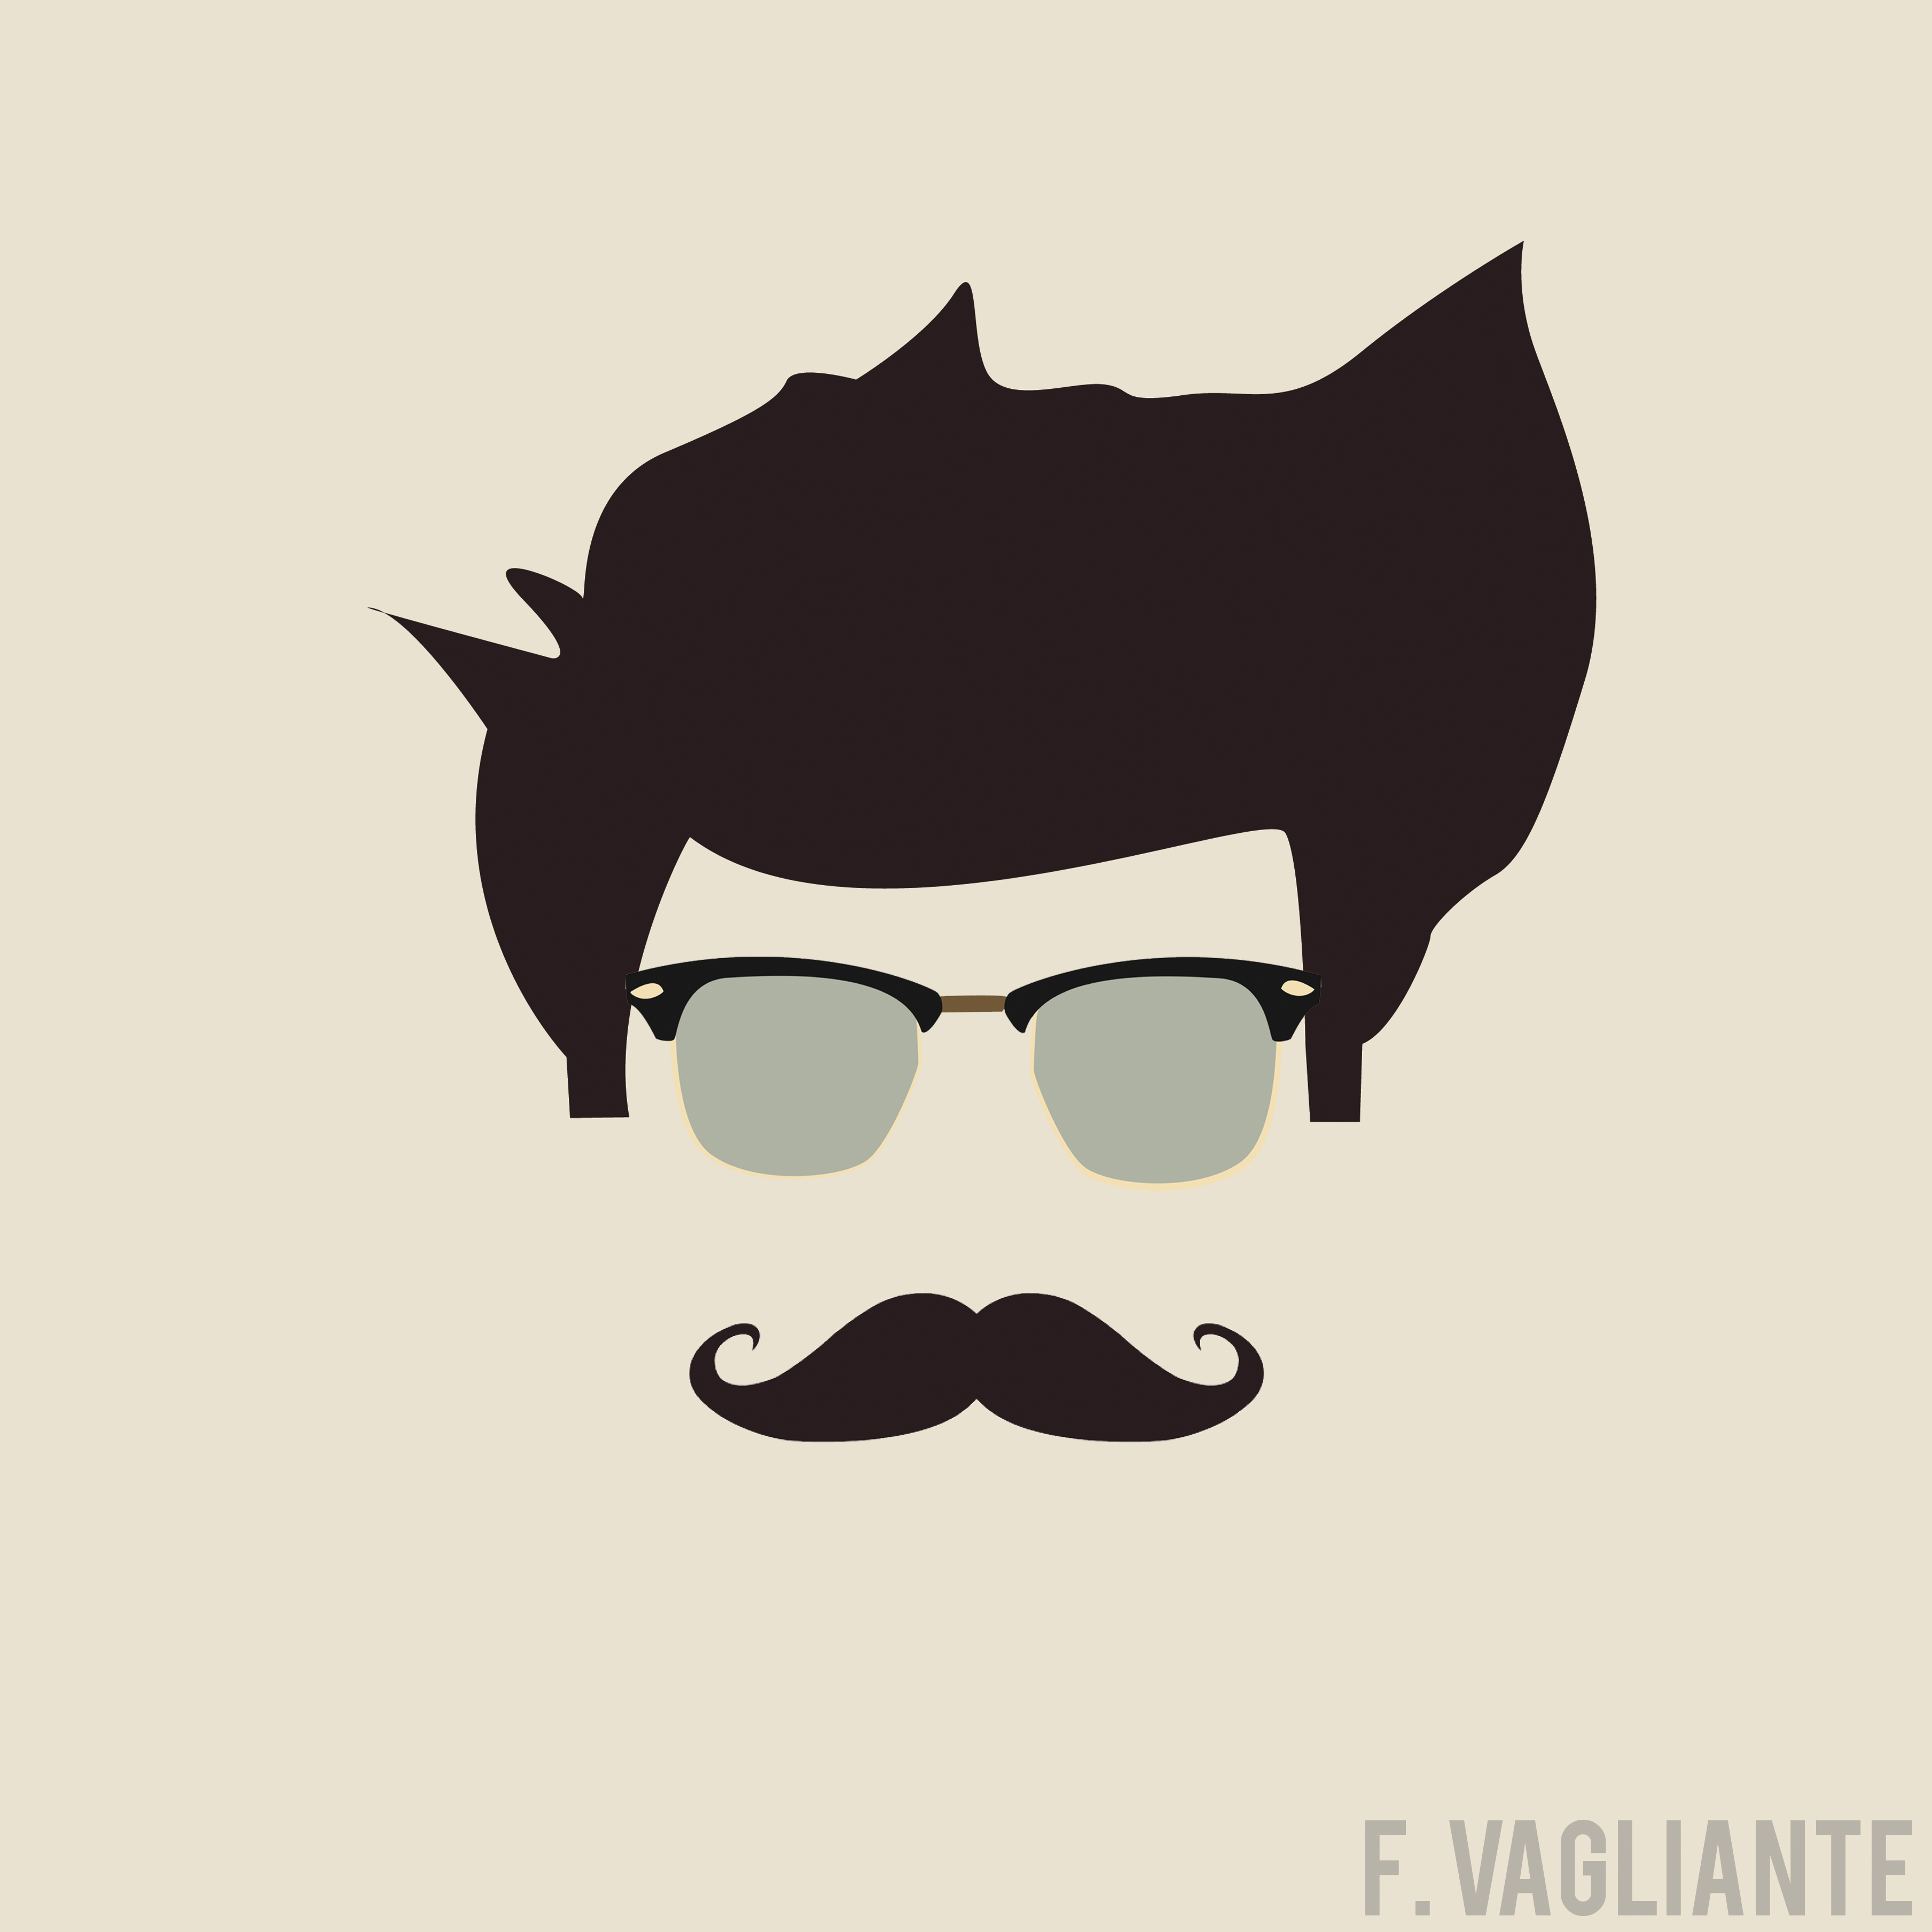 Mr. Moustache by frankvaglia on Clipart library